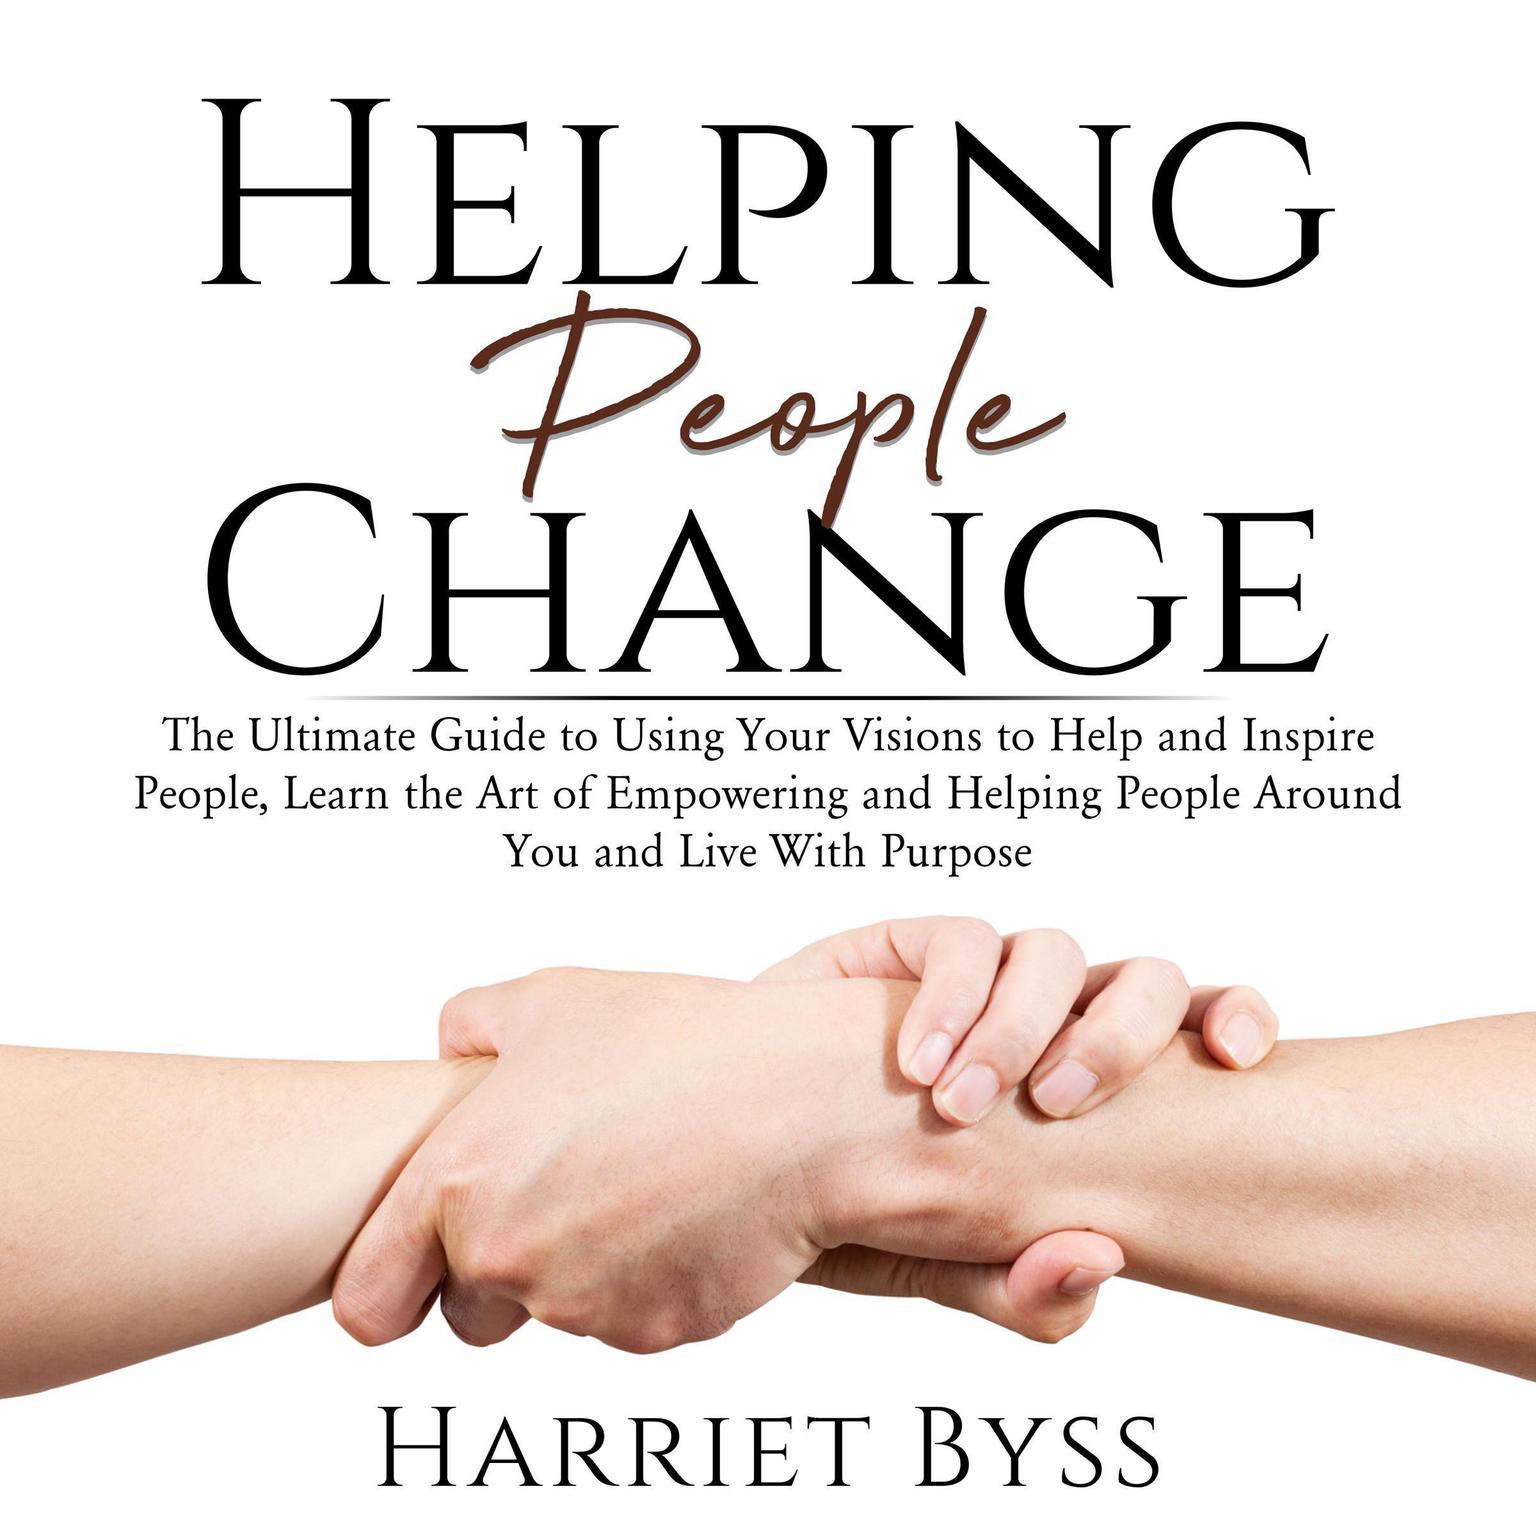 Helping People Change: : The Ultimate Guide to Using Your Visions to Help and Inspire People, Learn the Art of Empowering and Helping People Around You and Live With Purpose Audiobook, by Harriet Byss